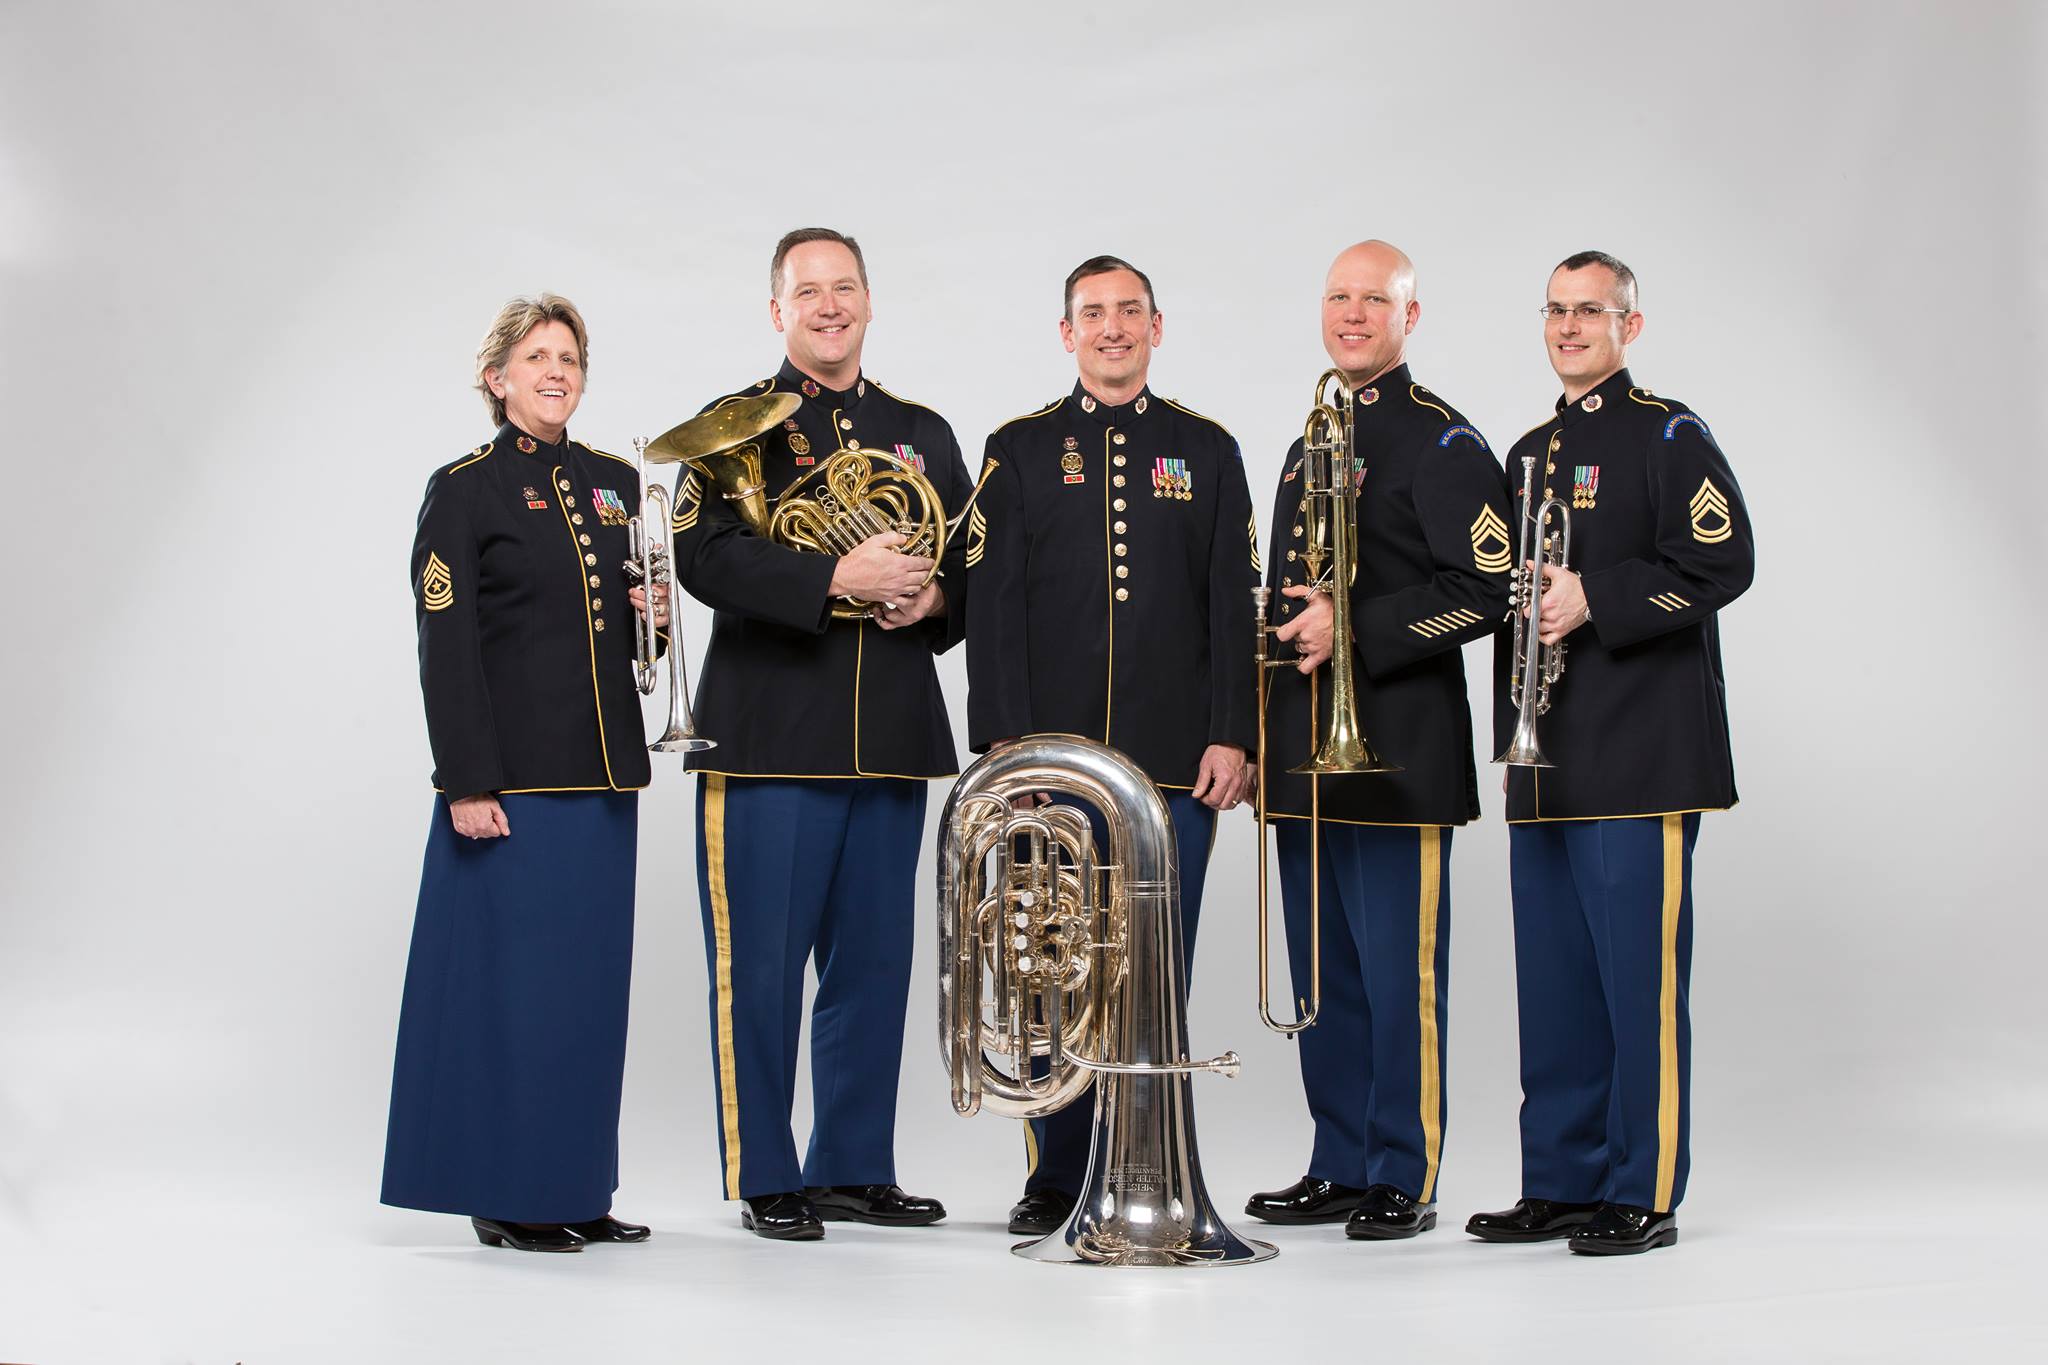 United States Army Field Band Brass Quintet to perform at Naturalization Ceremony on June 14, 2016, 1 p.m. at Homestead National Monument of America.